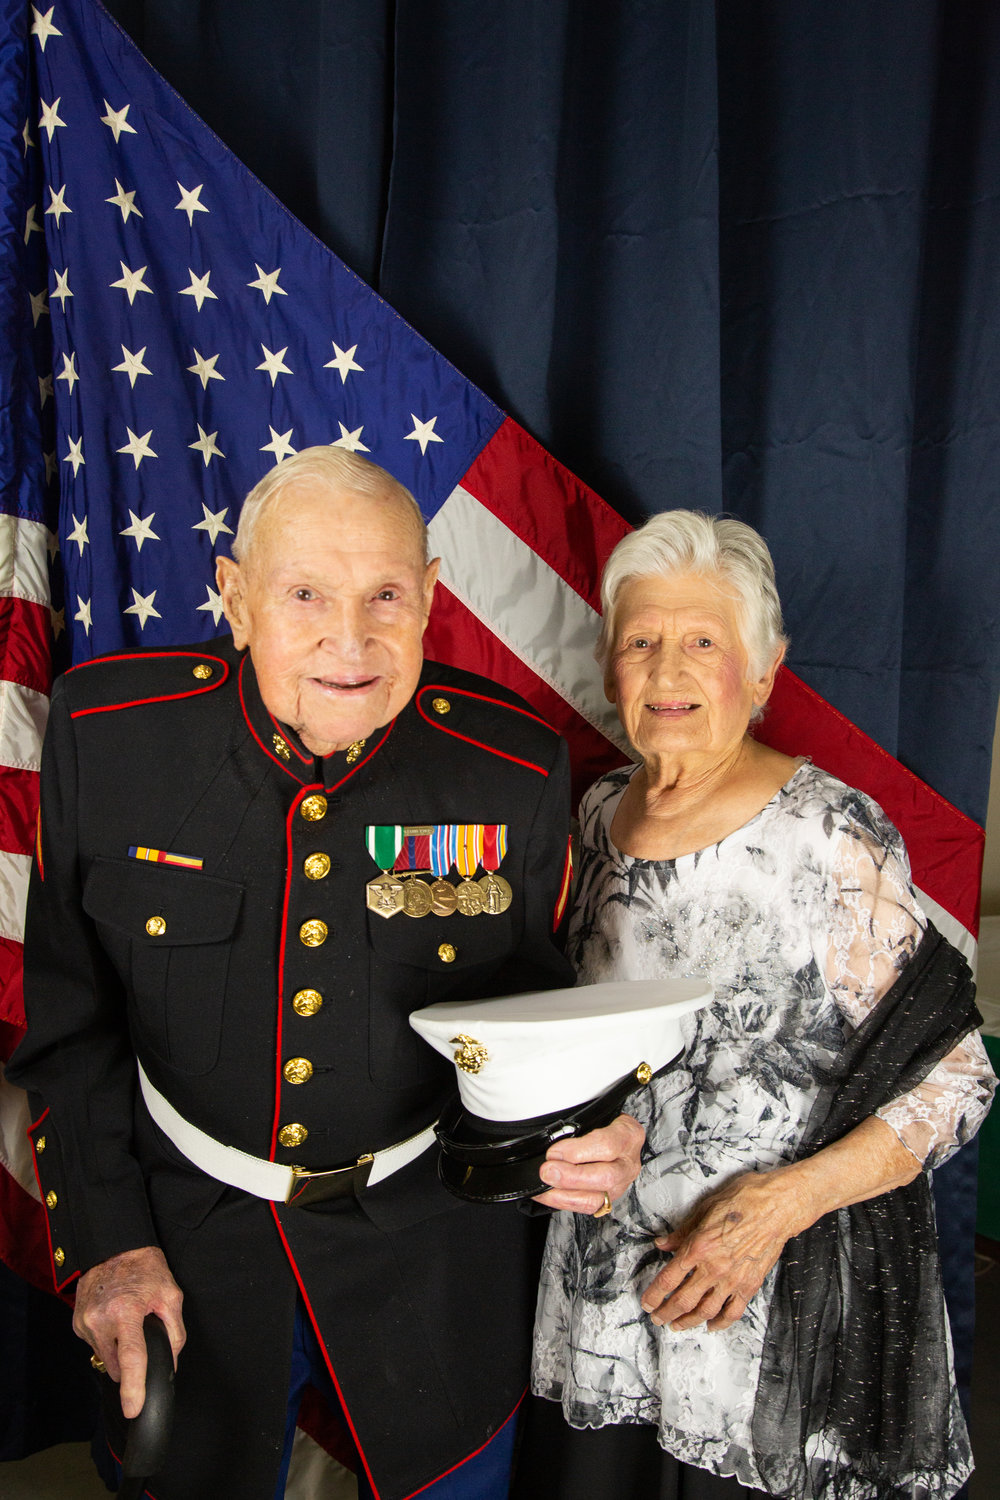 Private First Class James Krodel and his wife Mary Krodel. Krodel fought in Japan during World War Two as part of the 3rd Marine Division. He was nearby when the 5th Marine Division raised the flag on Mount Suribachi during the bloody battle of Iwo Jima.